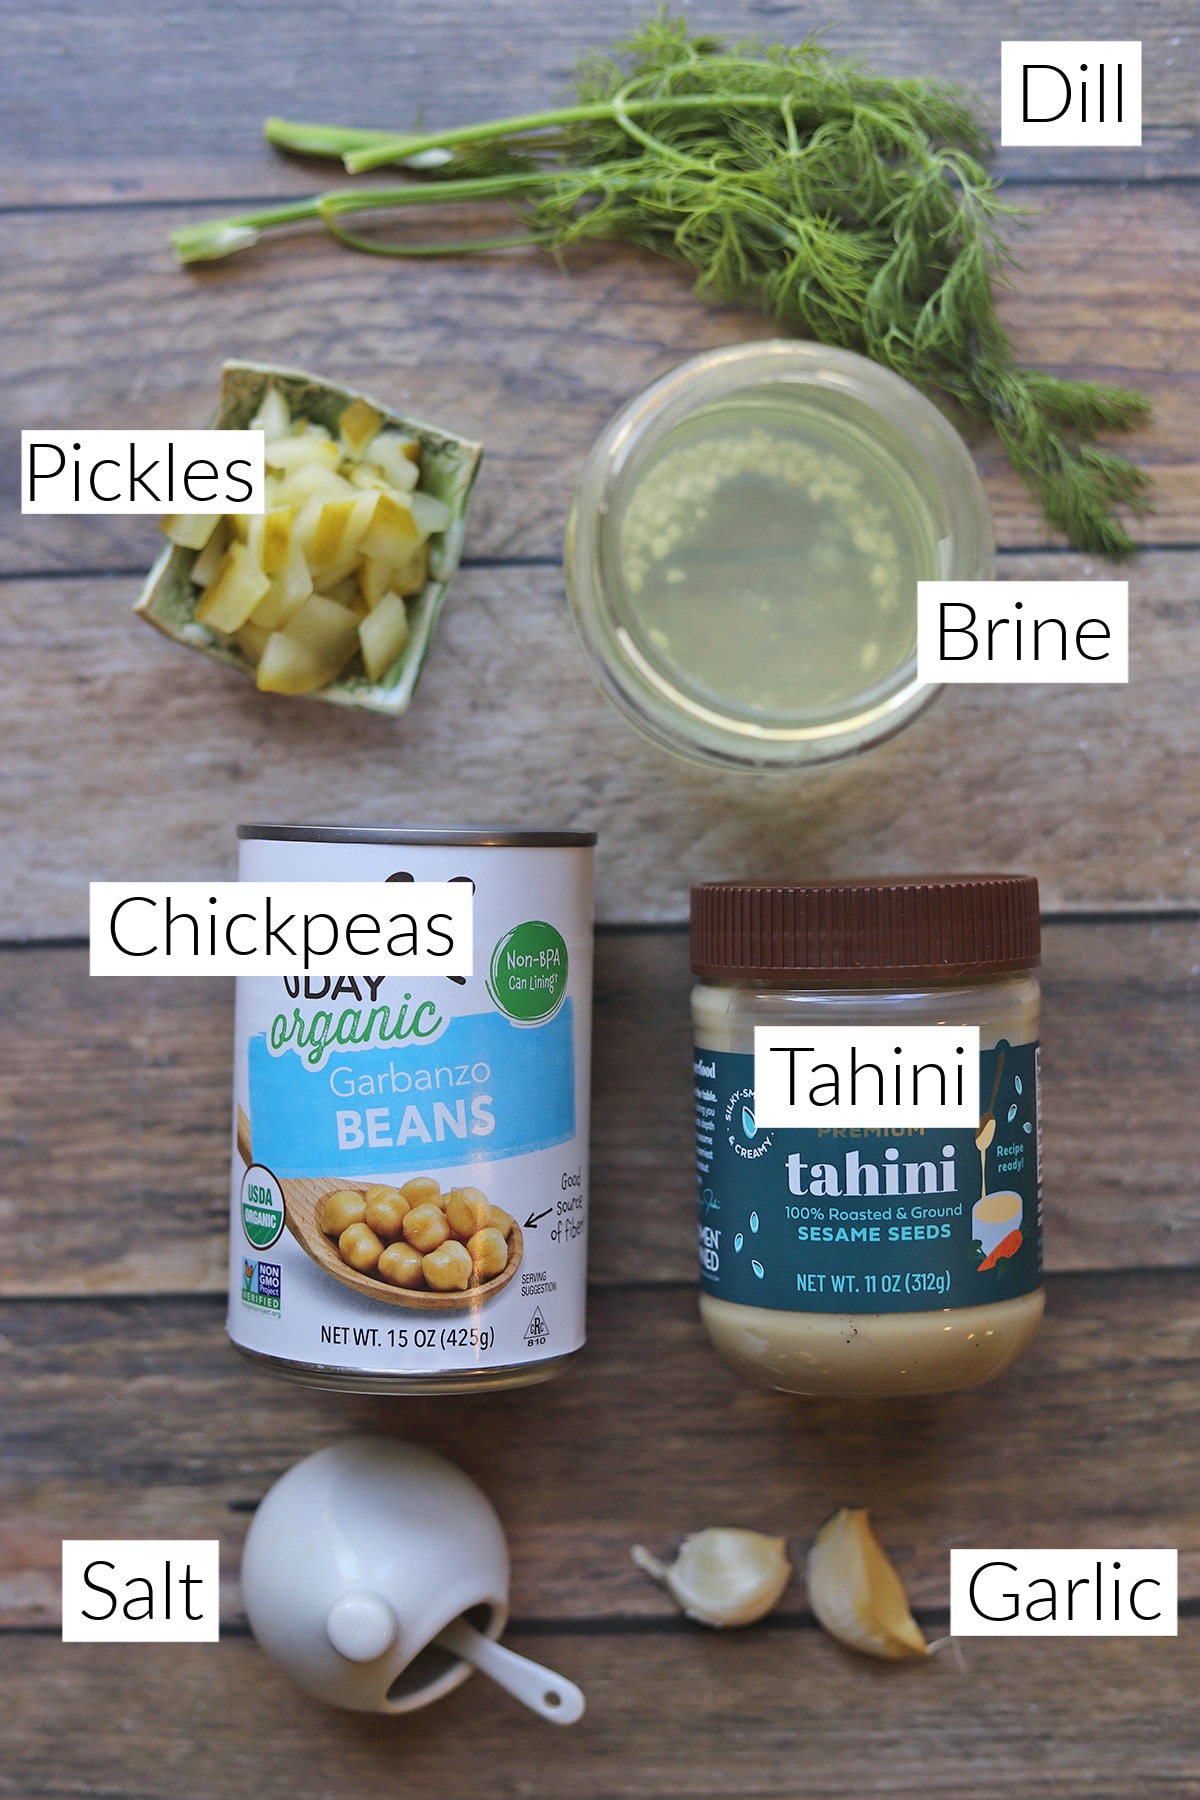 Labeled ingredients for dill pickle hummus.